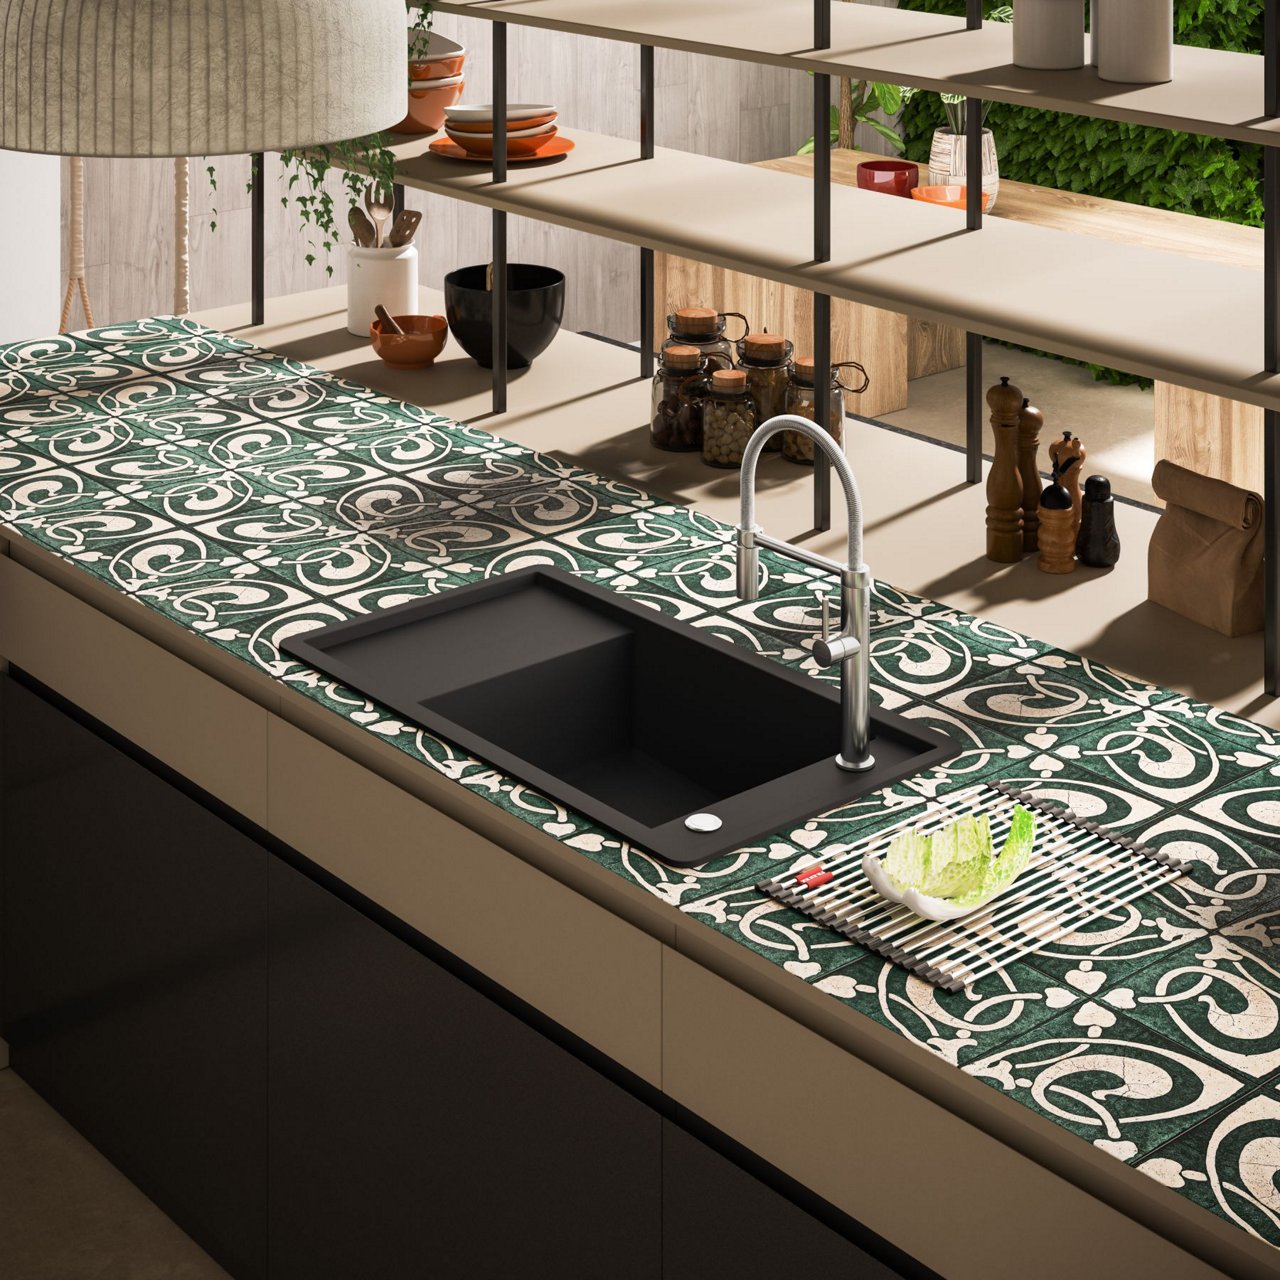 Franke Pescara tap and Fragranite black sink with green tiles around